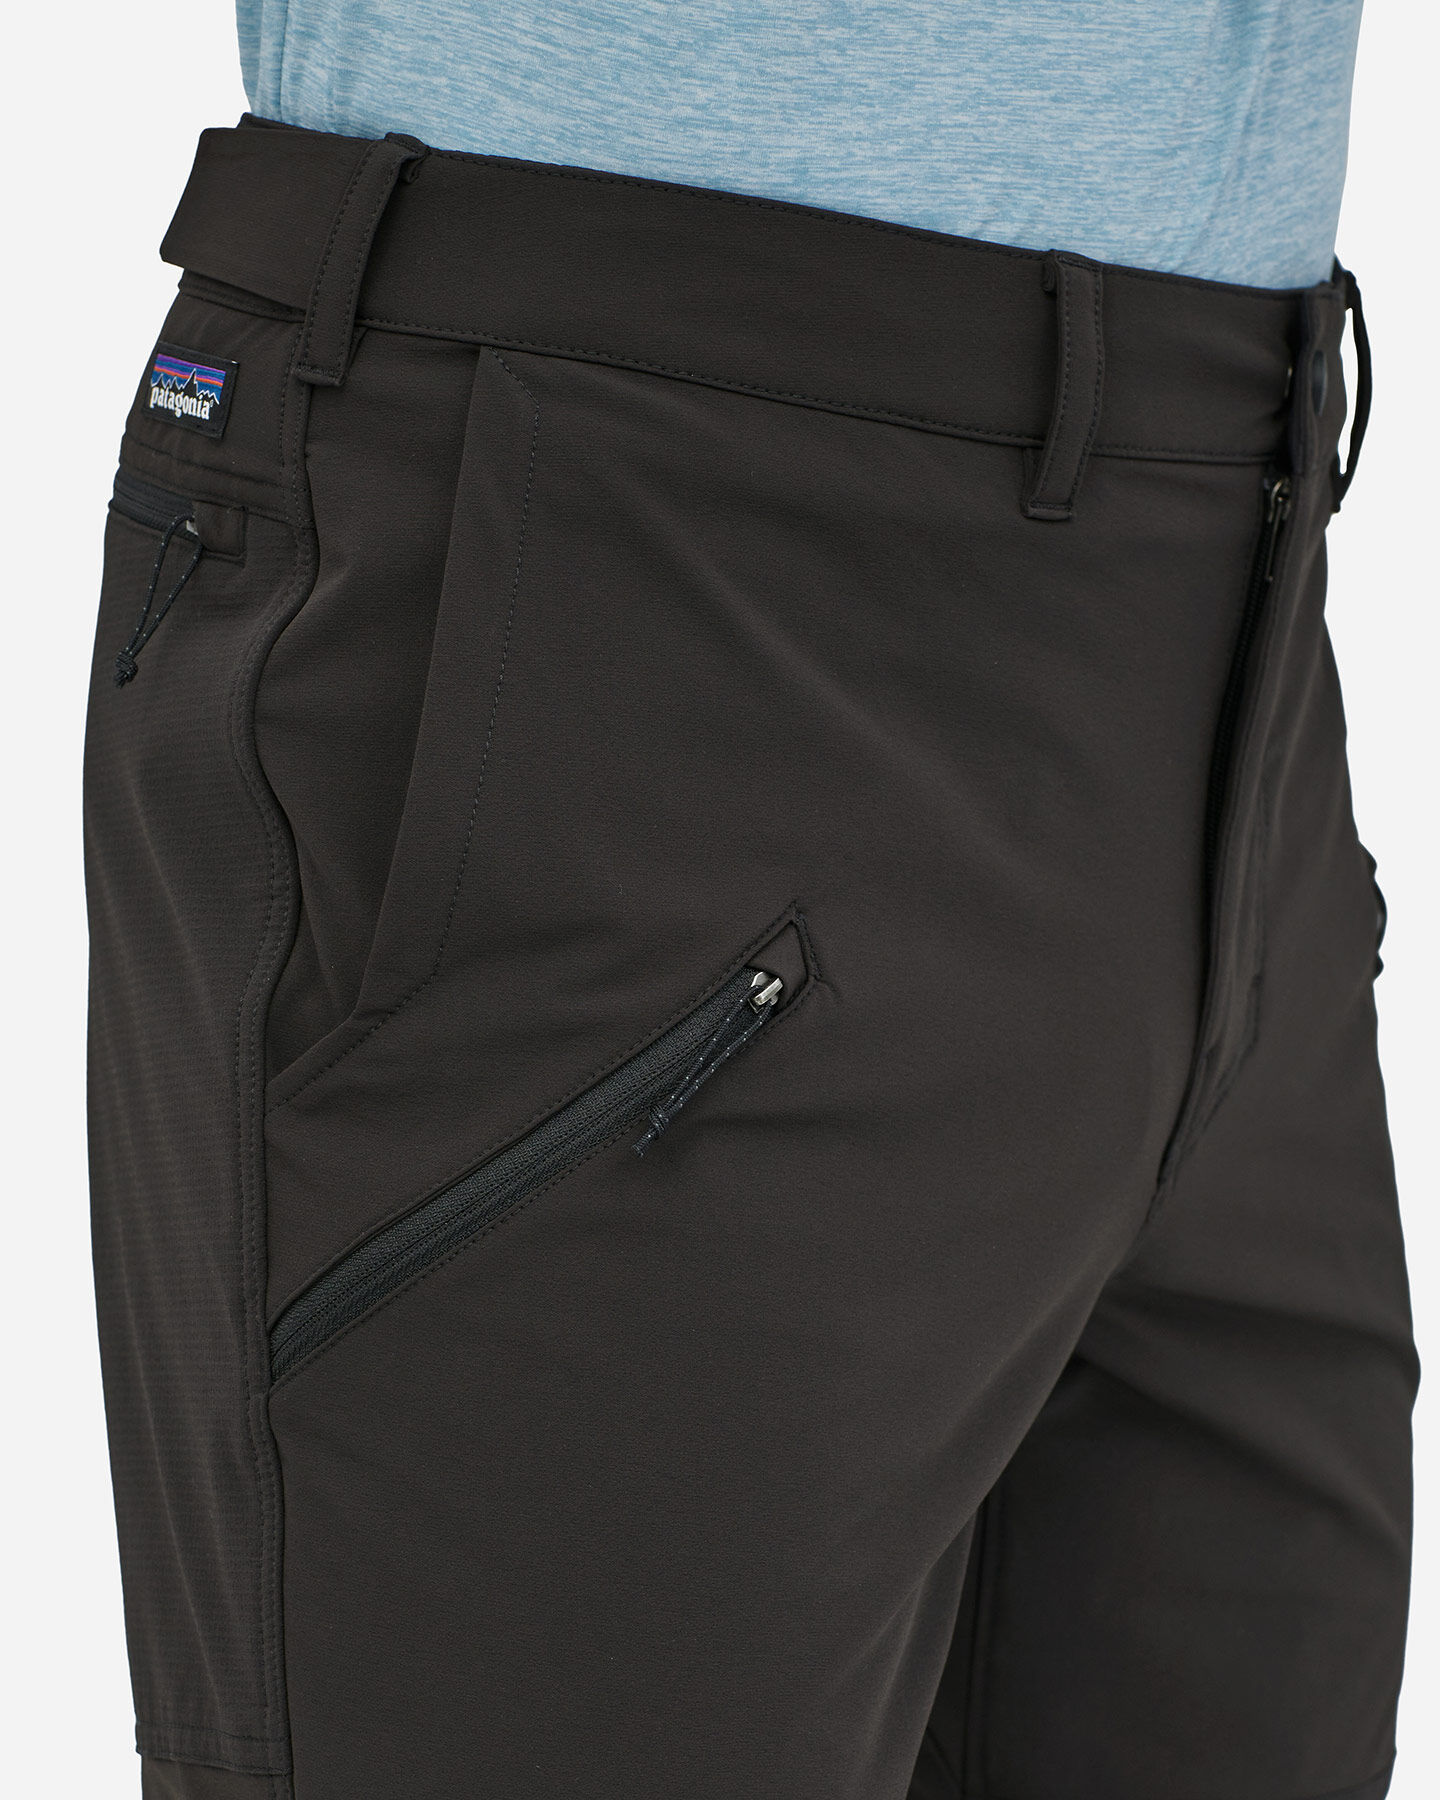  Pantalone outdoor PATAGONIA POINT PEAK TRAIL M S4097087|BLK|34 scatto 3